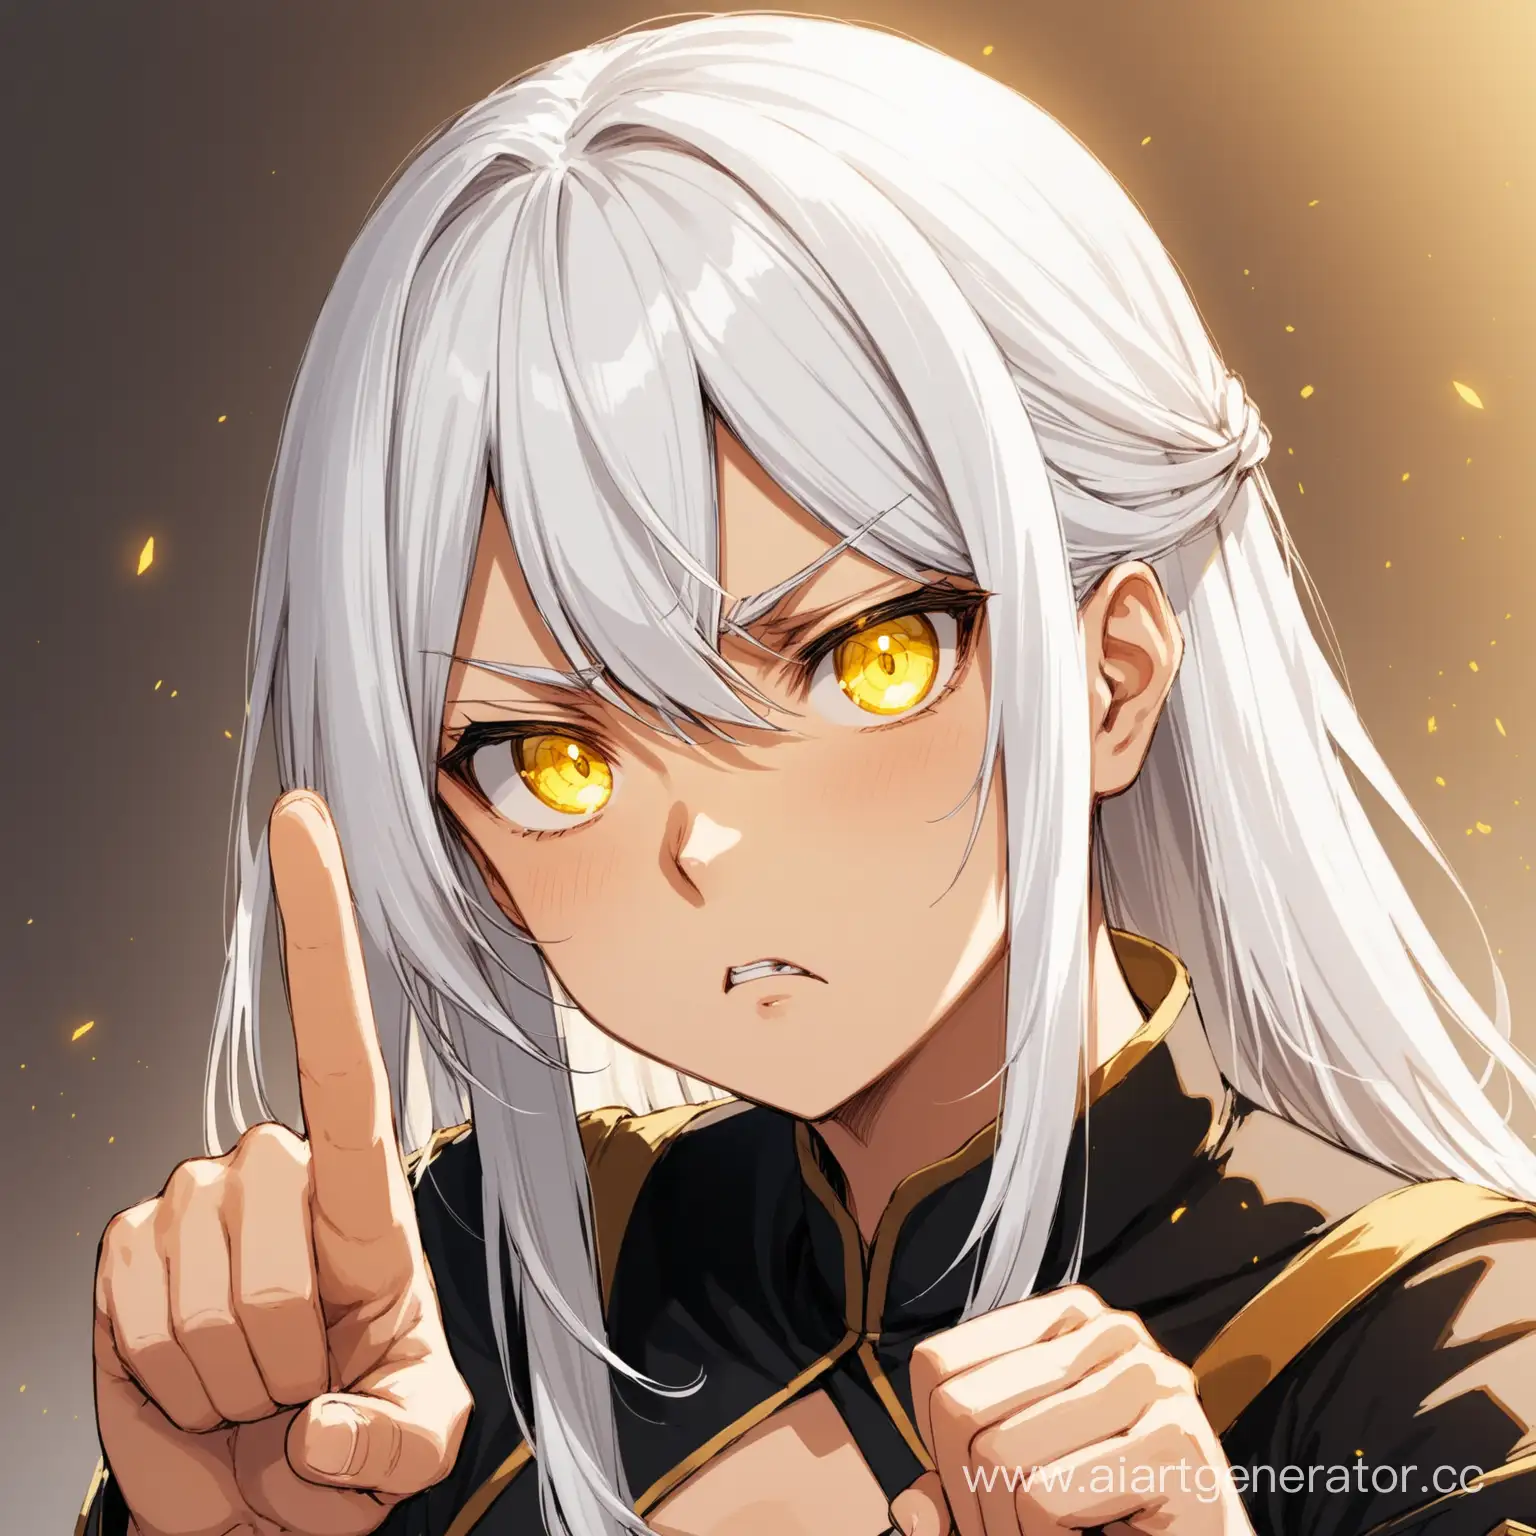 One girl. White hair. Yellow eyes. He raises his finger up. A disgruntled face.